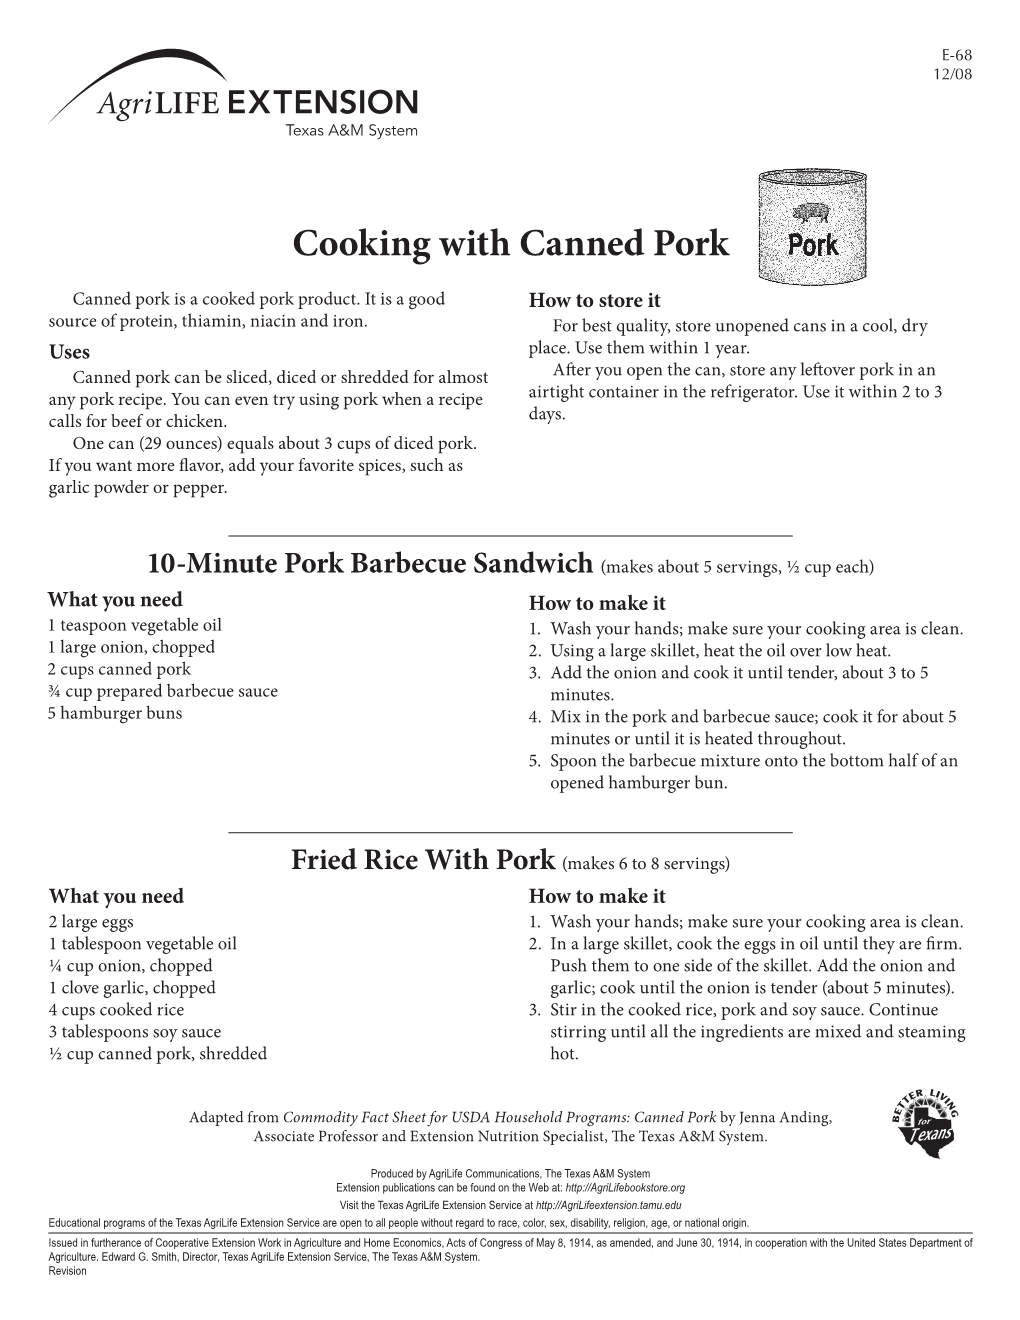 Cooking with Canned Pork